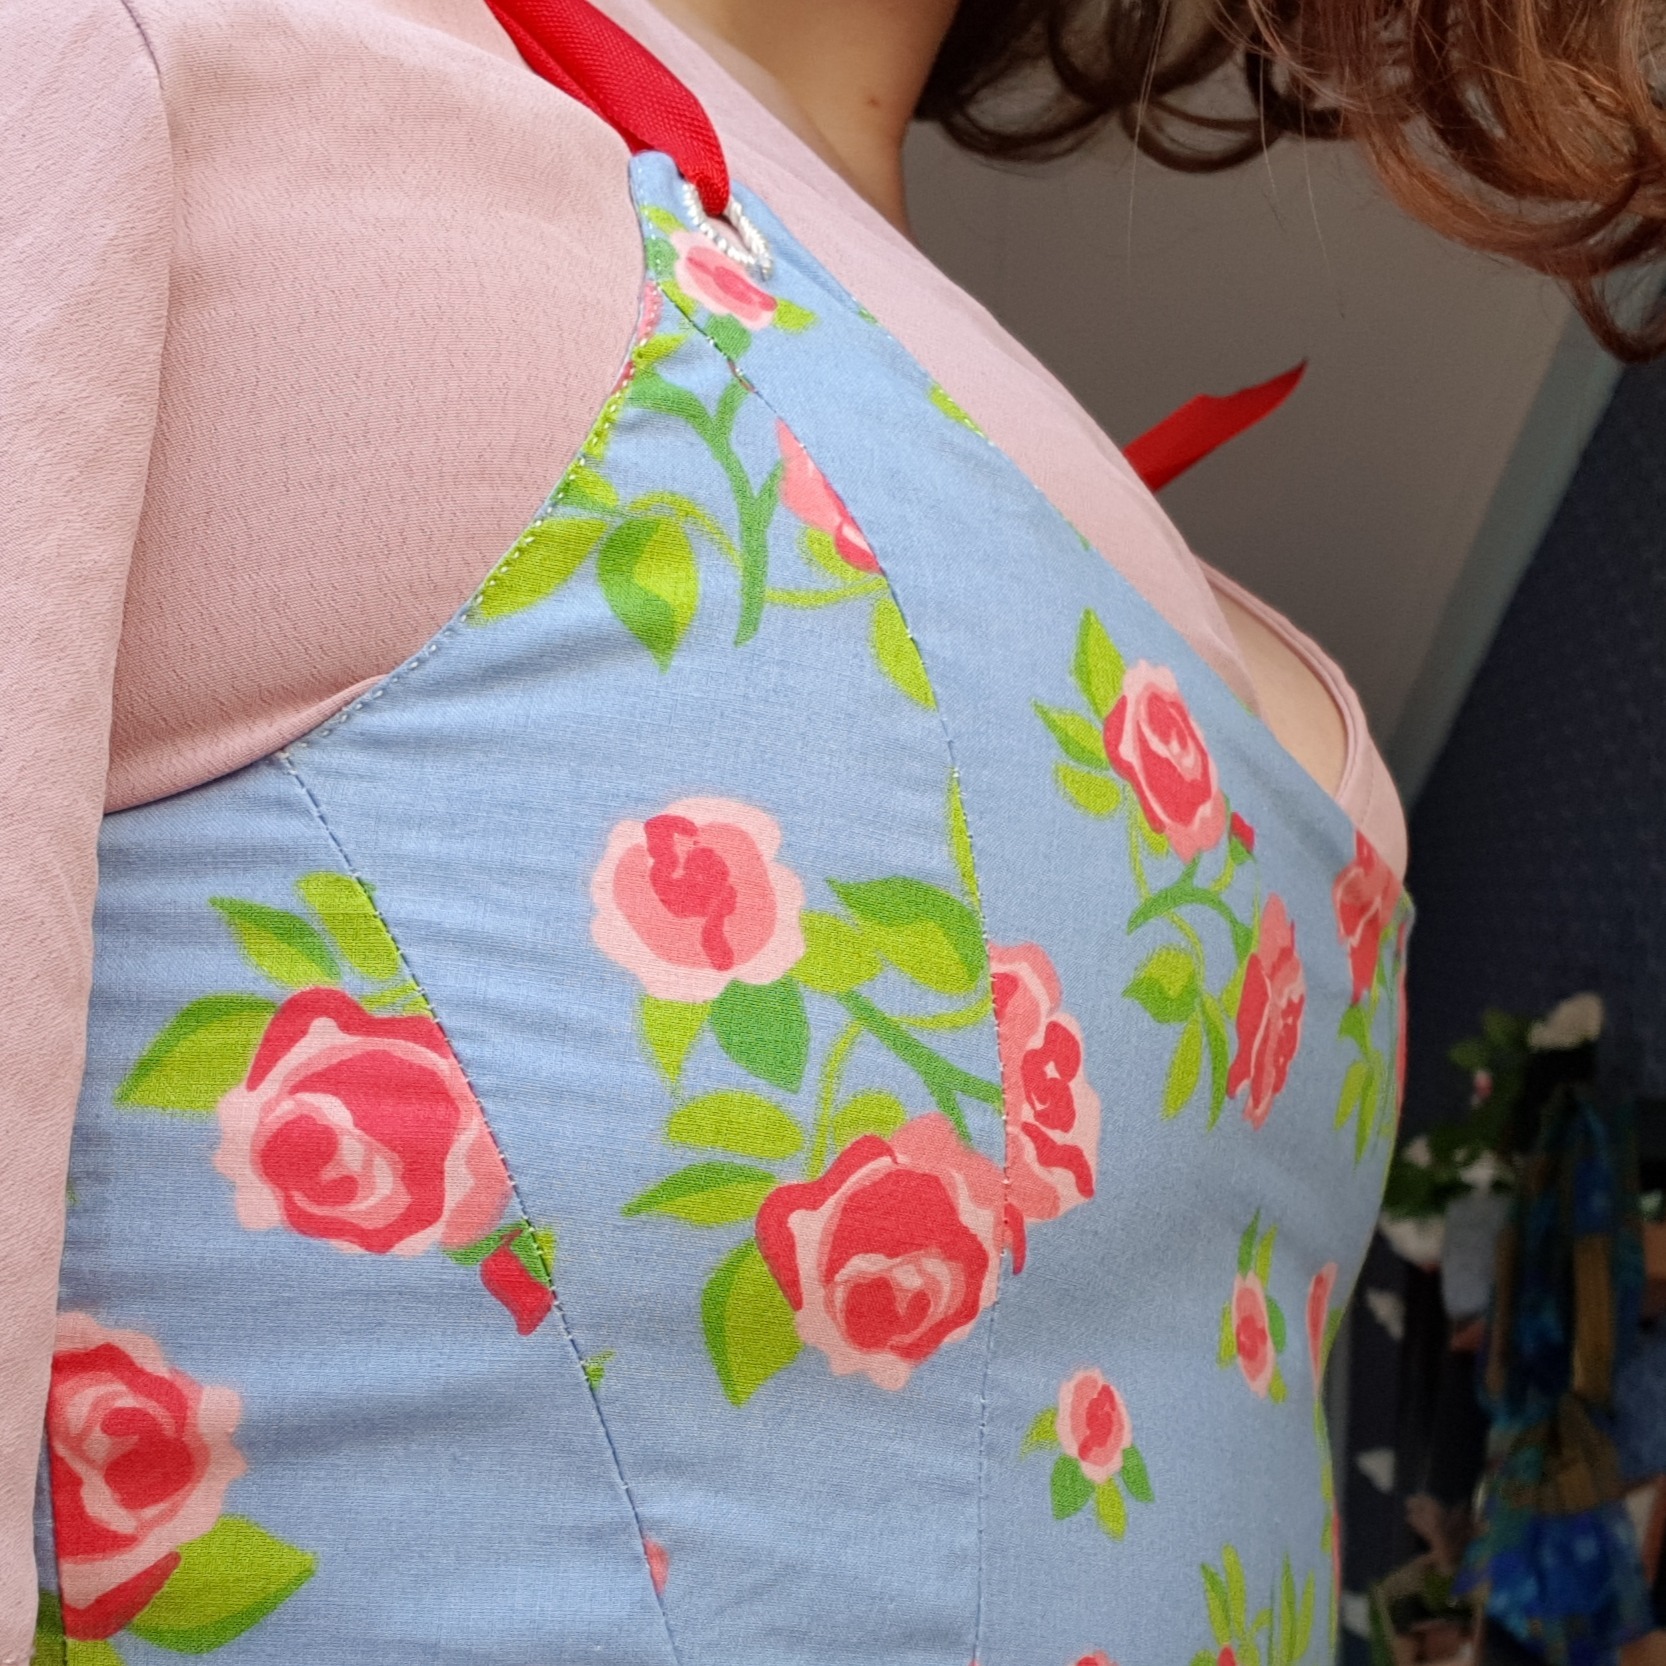 verysecretlykinky:verysecretlykinky:Oh! By the wayyyy! While I wasn’t feeling well I started a sewing project to keep me doing positive things and it turned out so well! Would you all like to see??I made a corset!!!!! Completely by hand and without